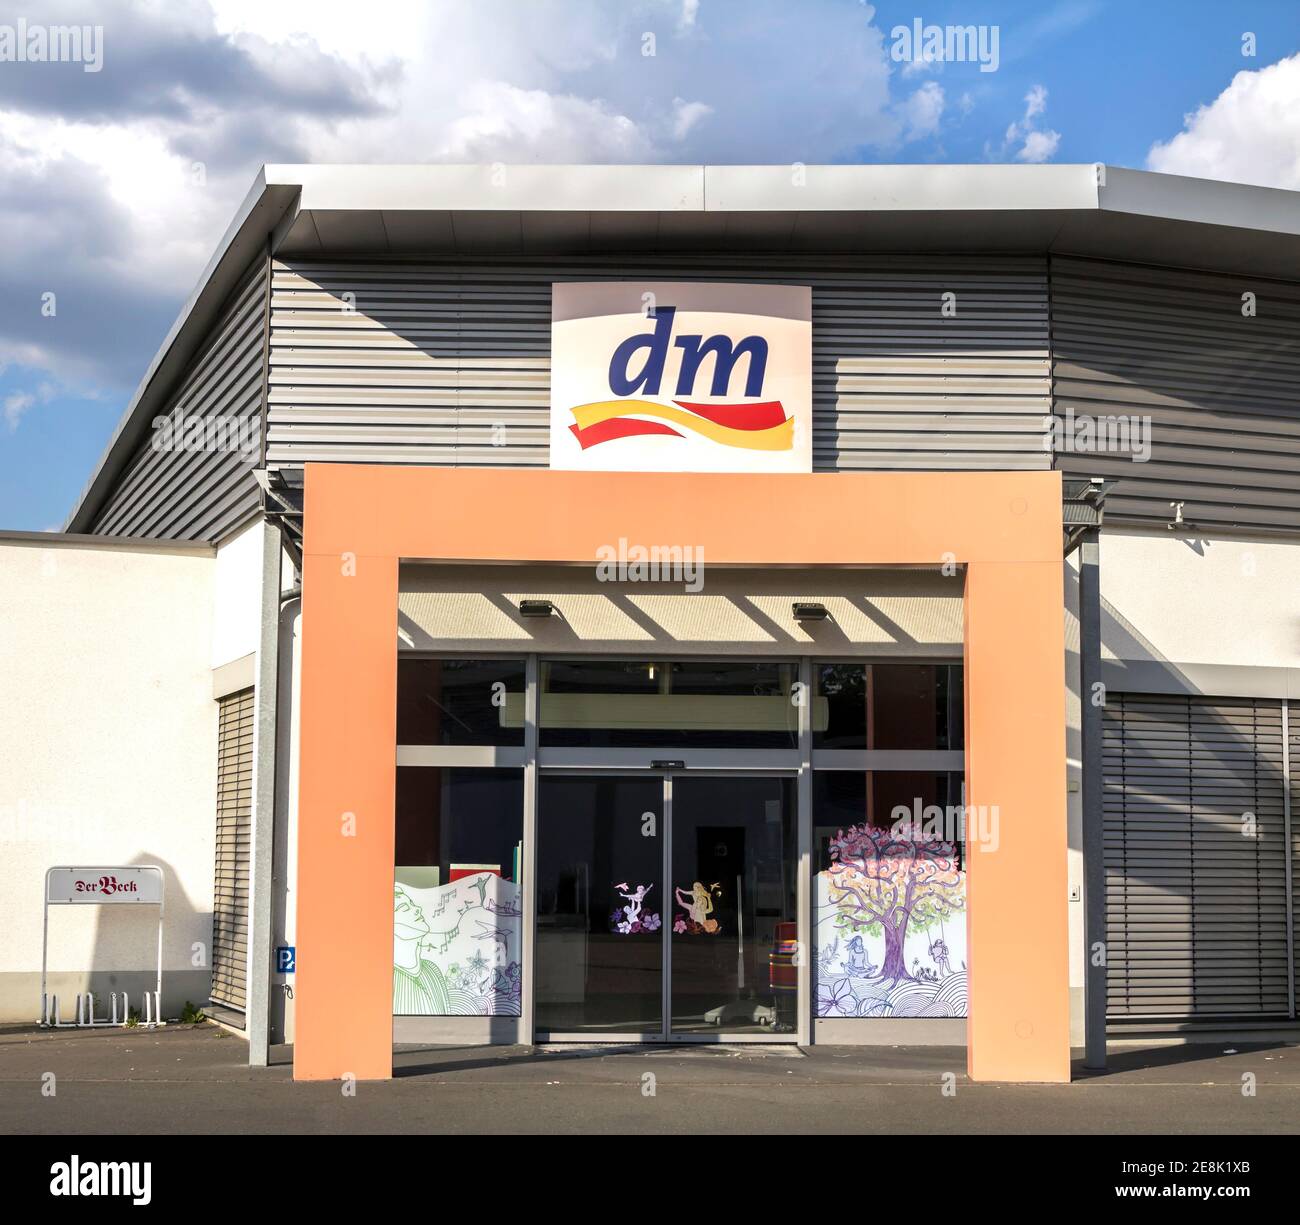 Nurnberg, Germany : Dm drogeriemarkt store. Dm-drogerie markt is a chain of  retail drugstore chain for cosmetics, healthcare and household products  Stock Photo - Alamy